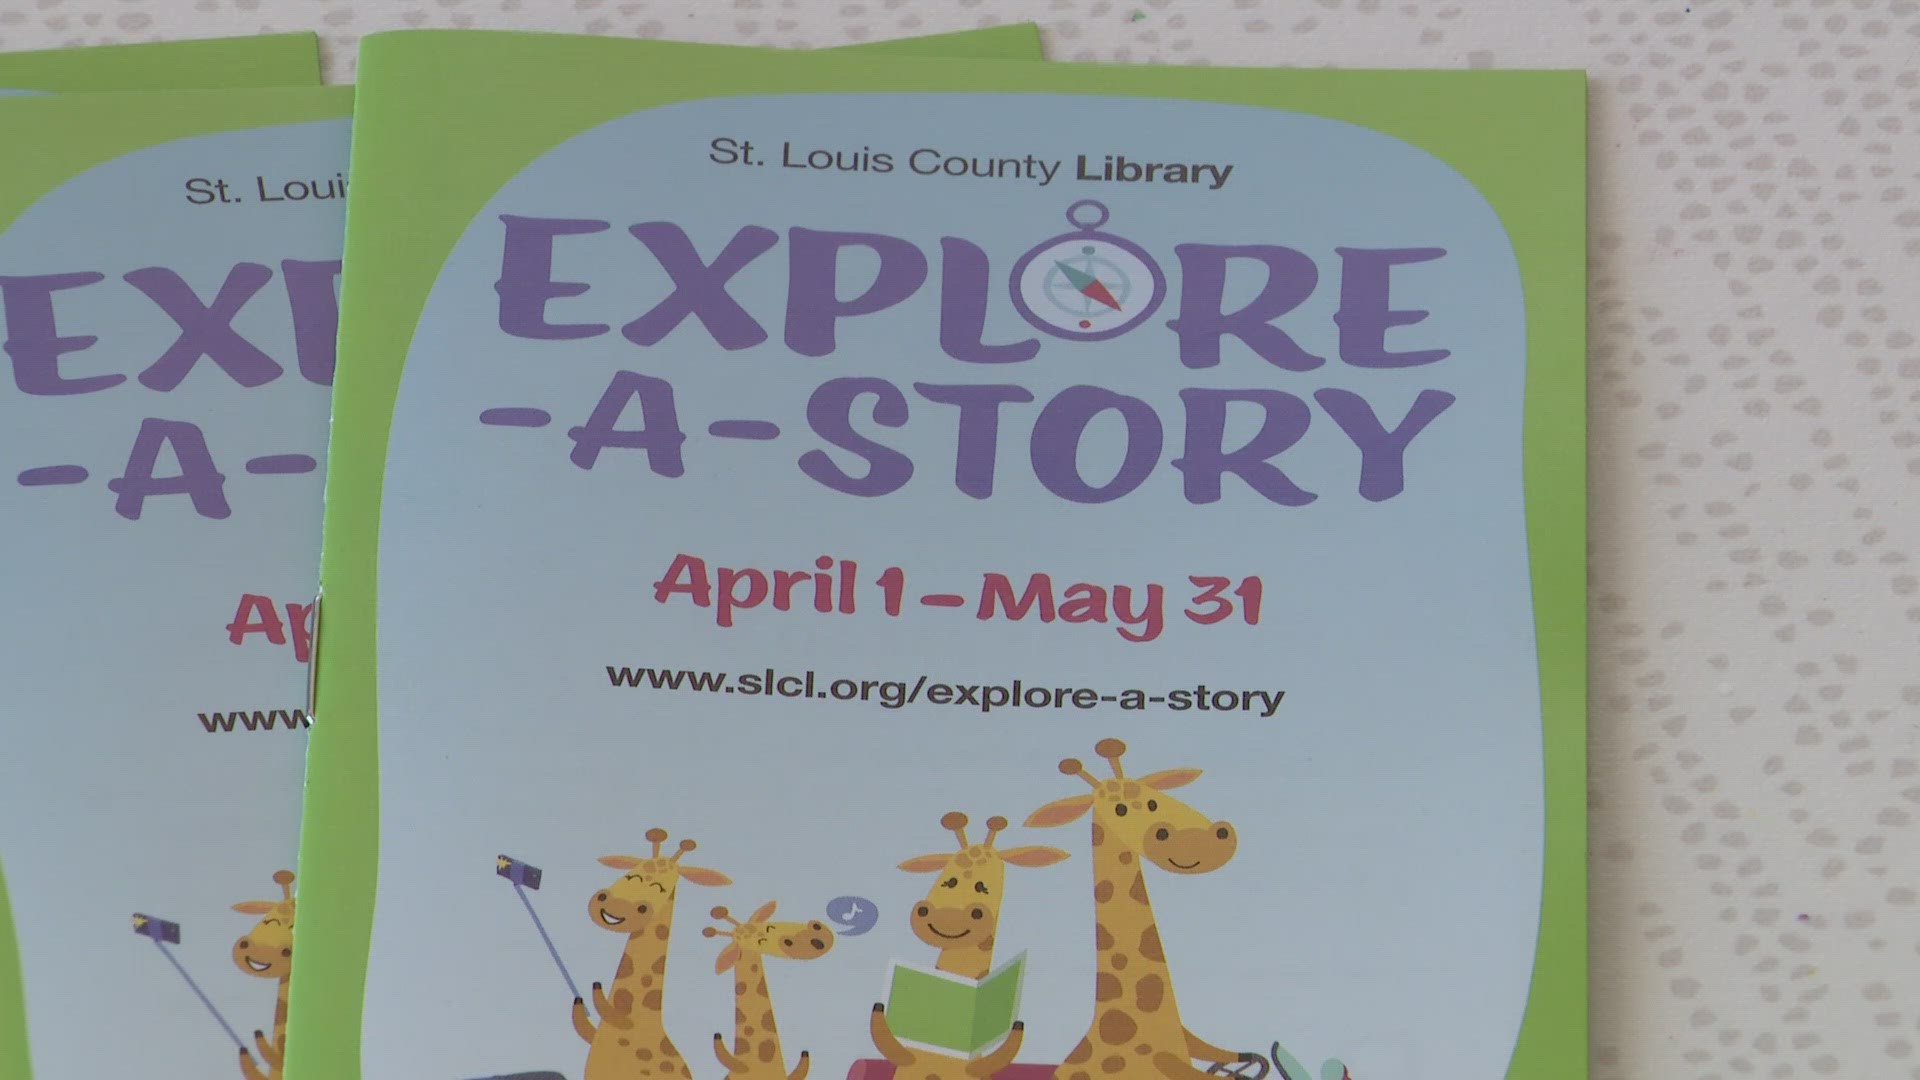 The Explore-A-Story program runs from April 1- May 31. It gives the chance for families to explore several different parks and local places, at little-to-no cost.